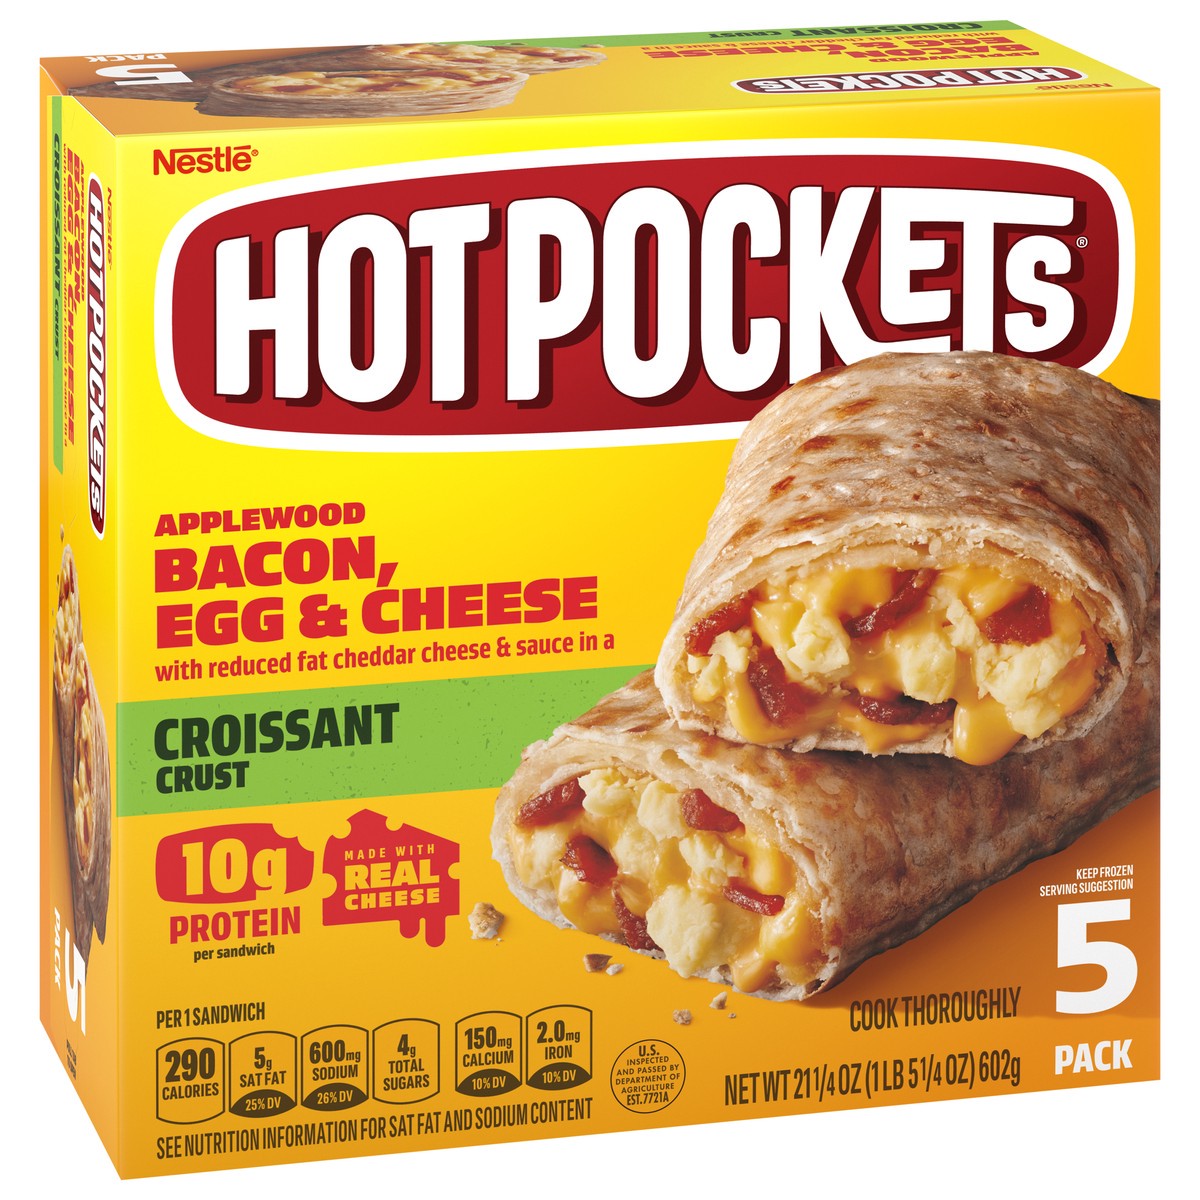 slide 2 of 9, Hot Pockets Applewood Bacon, Egg & Cheese Croissant Crust Frozen Breakfast Sandwiches, Breakfast Hot Pockets Made with Real Reduced Fat Cheddar Cheese, 5 Count, 21.25 oz